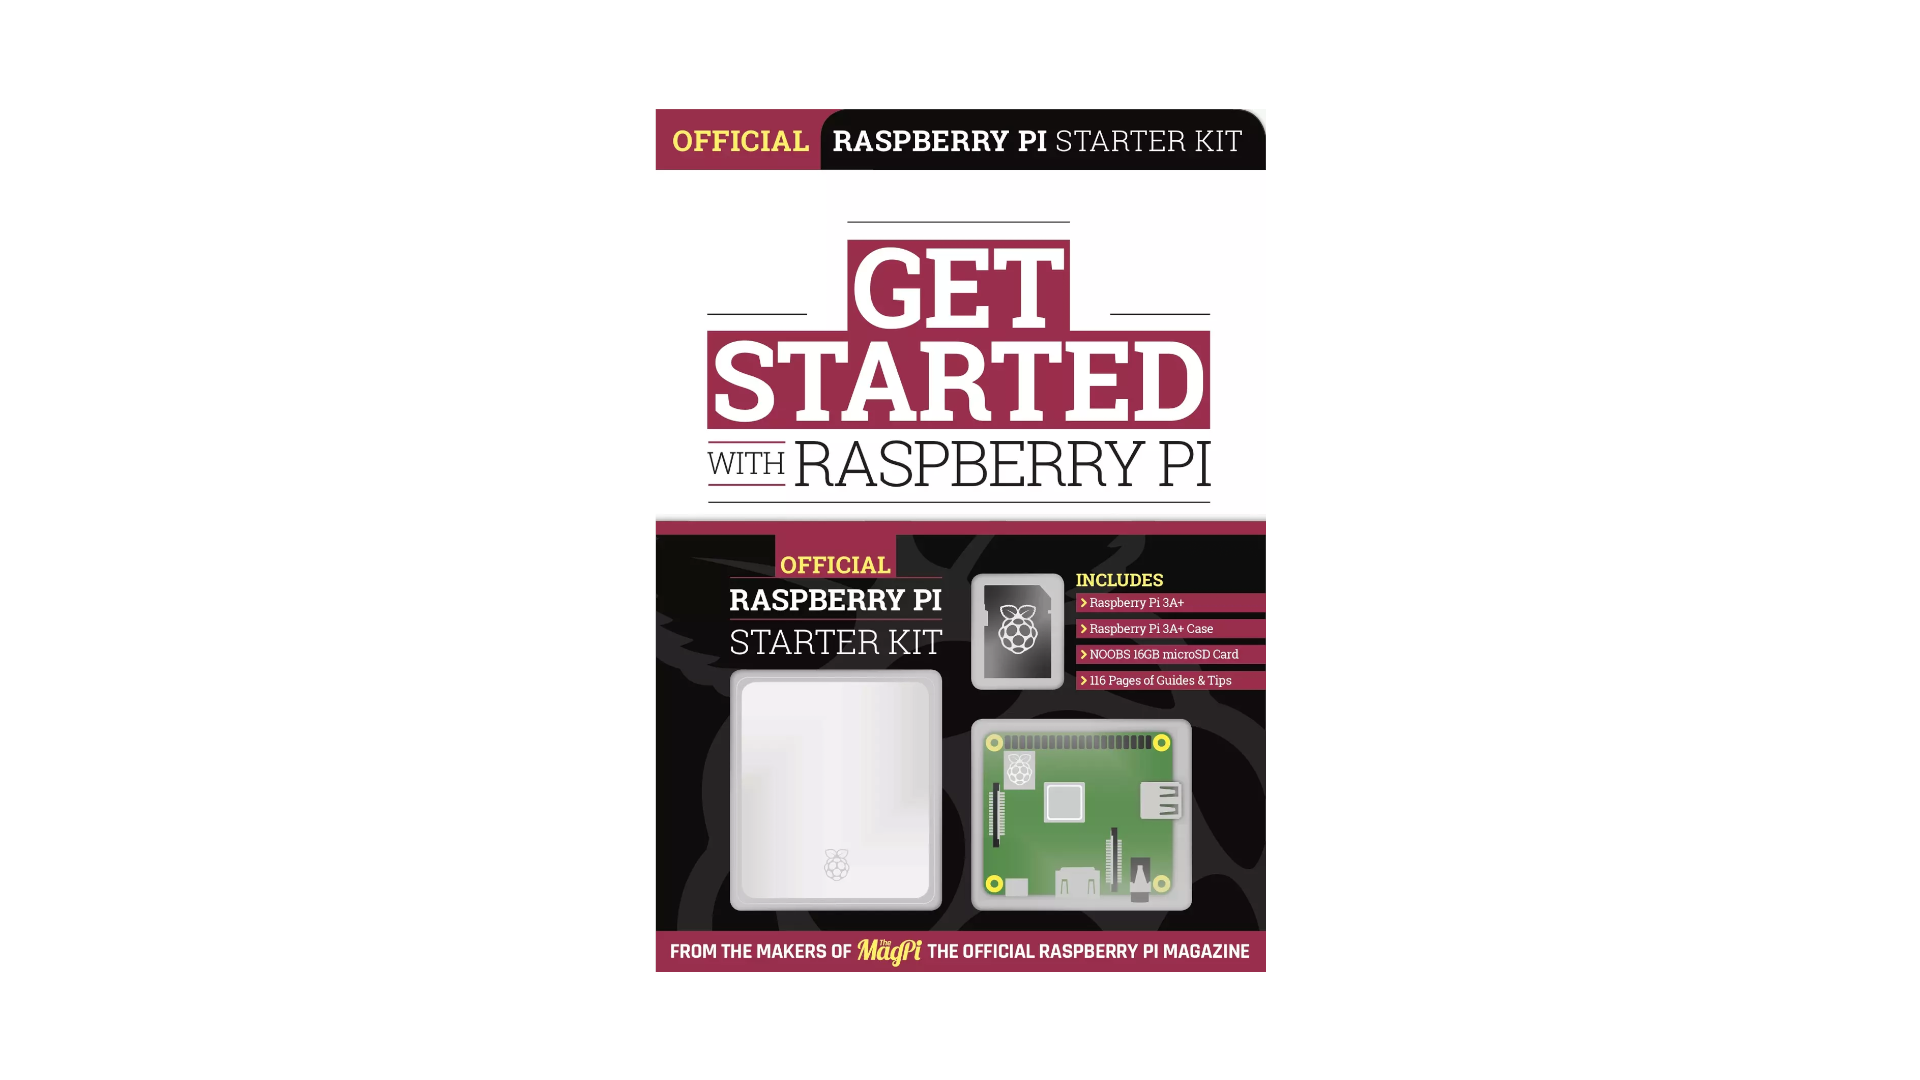 Get started with Raspberry Pi